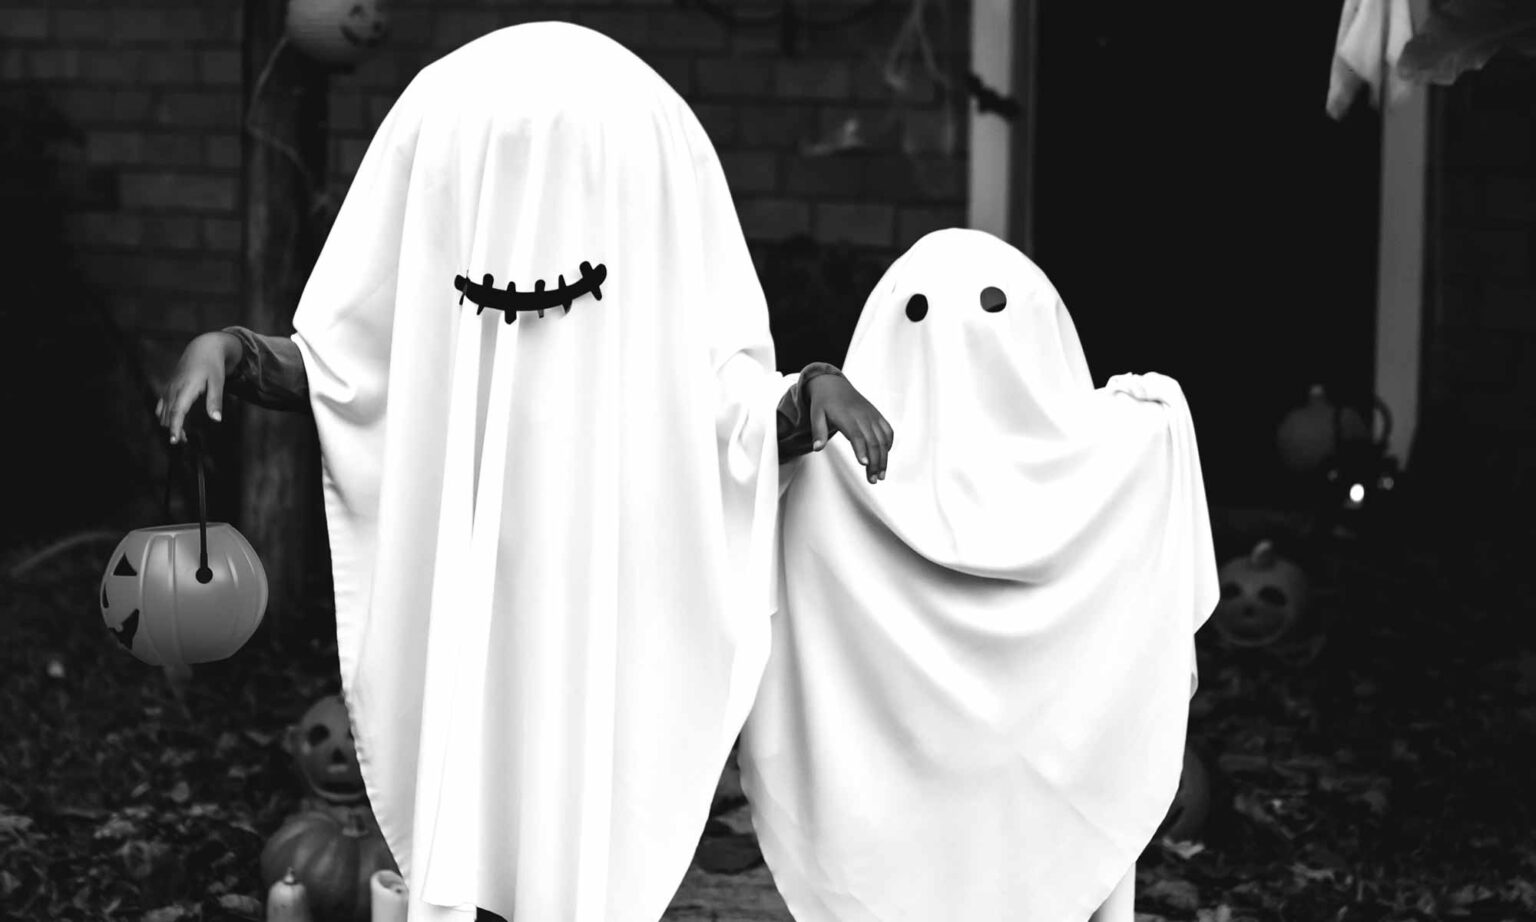 Ghosts or actually people in sheets